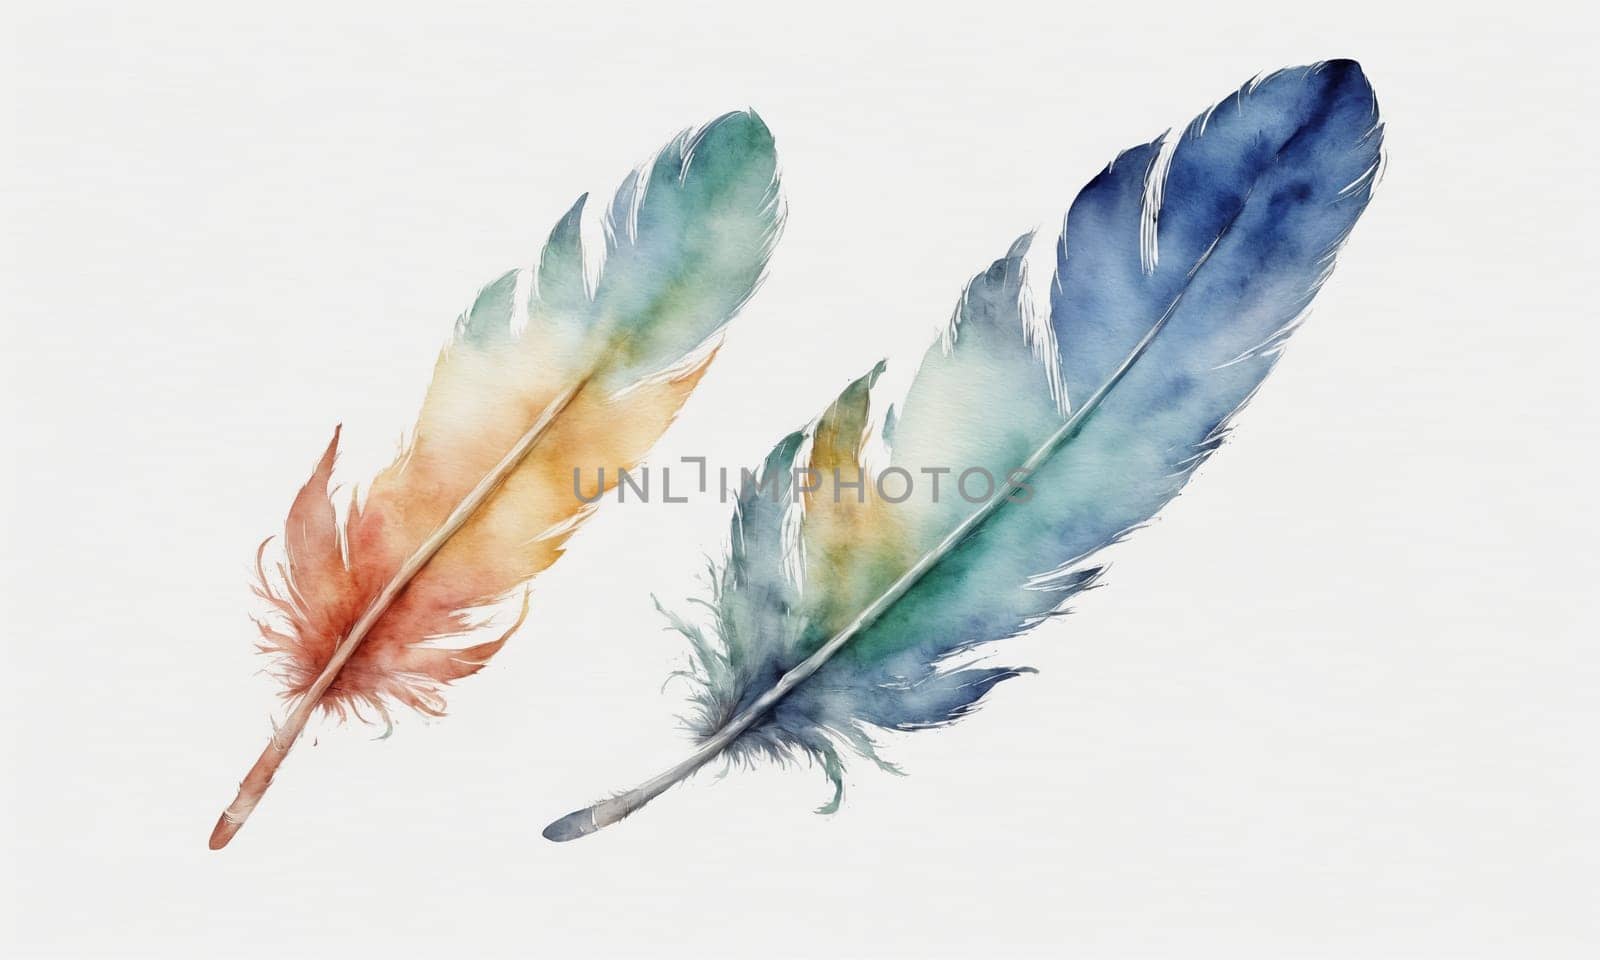 Watercolor feathers isolated on white background. Hand-drawn illustration. by Andre1ns